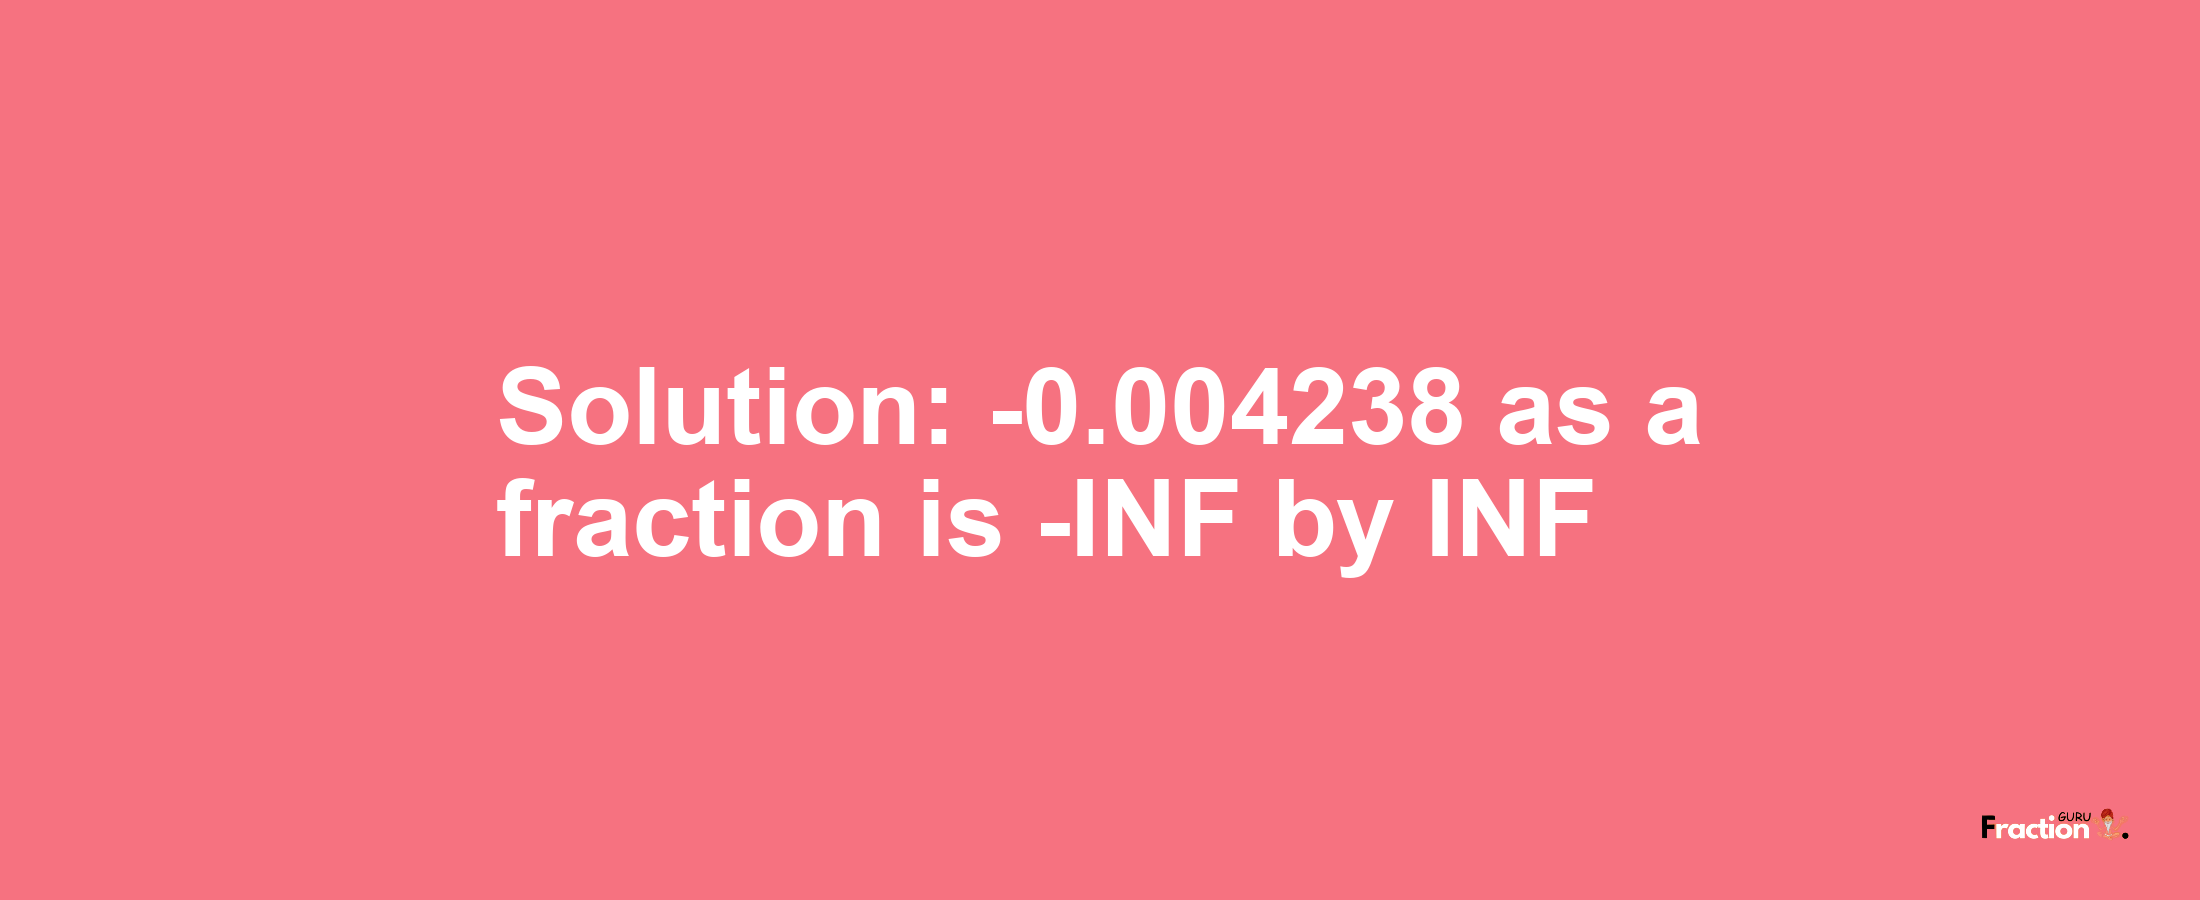 Solution:-0.004238 as a fraction is -INF/INF